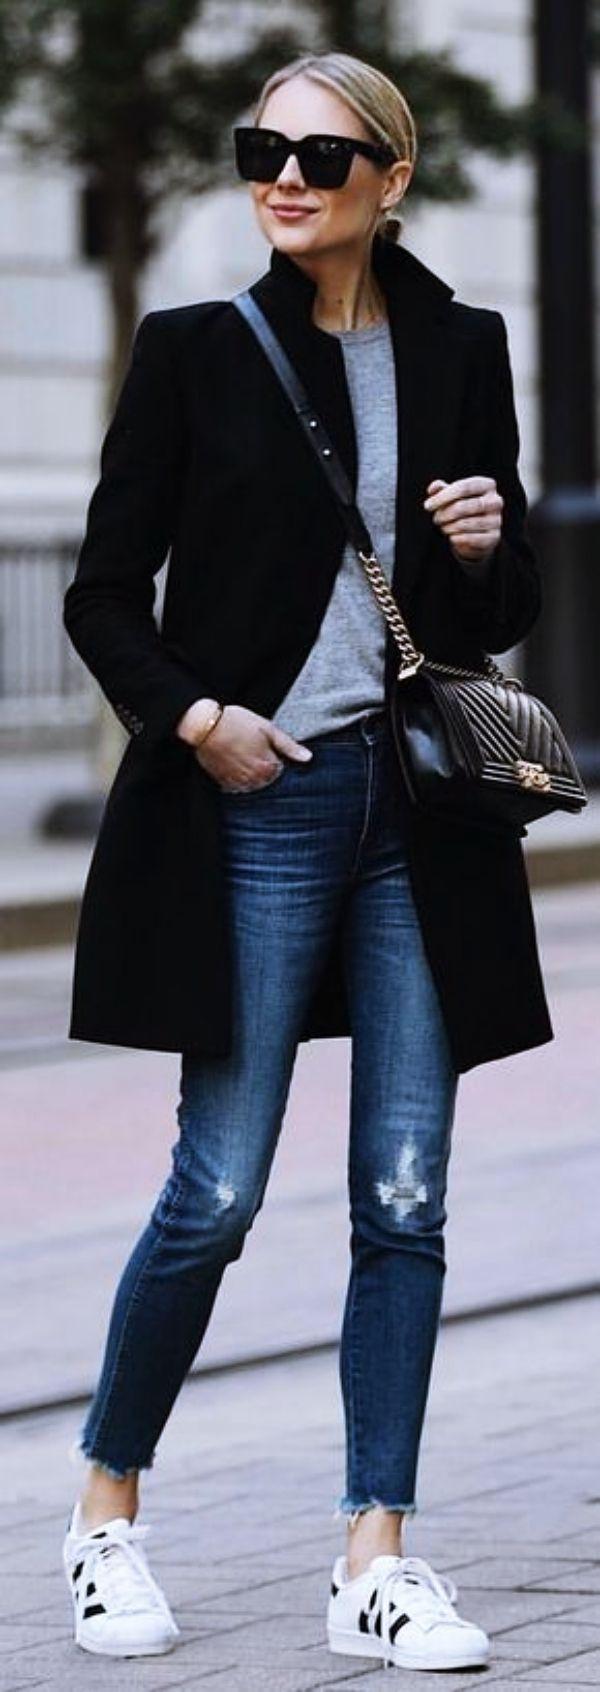 Black Coat Outfit. Casual outfits Trench coat, Casual wear: Girls Work Outfit,  black coat,  Wool Coat  